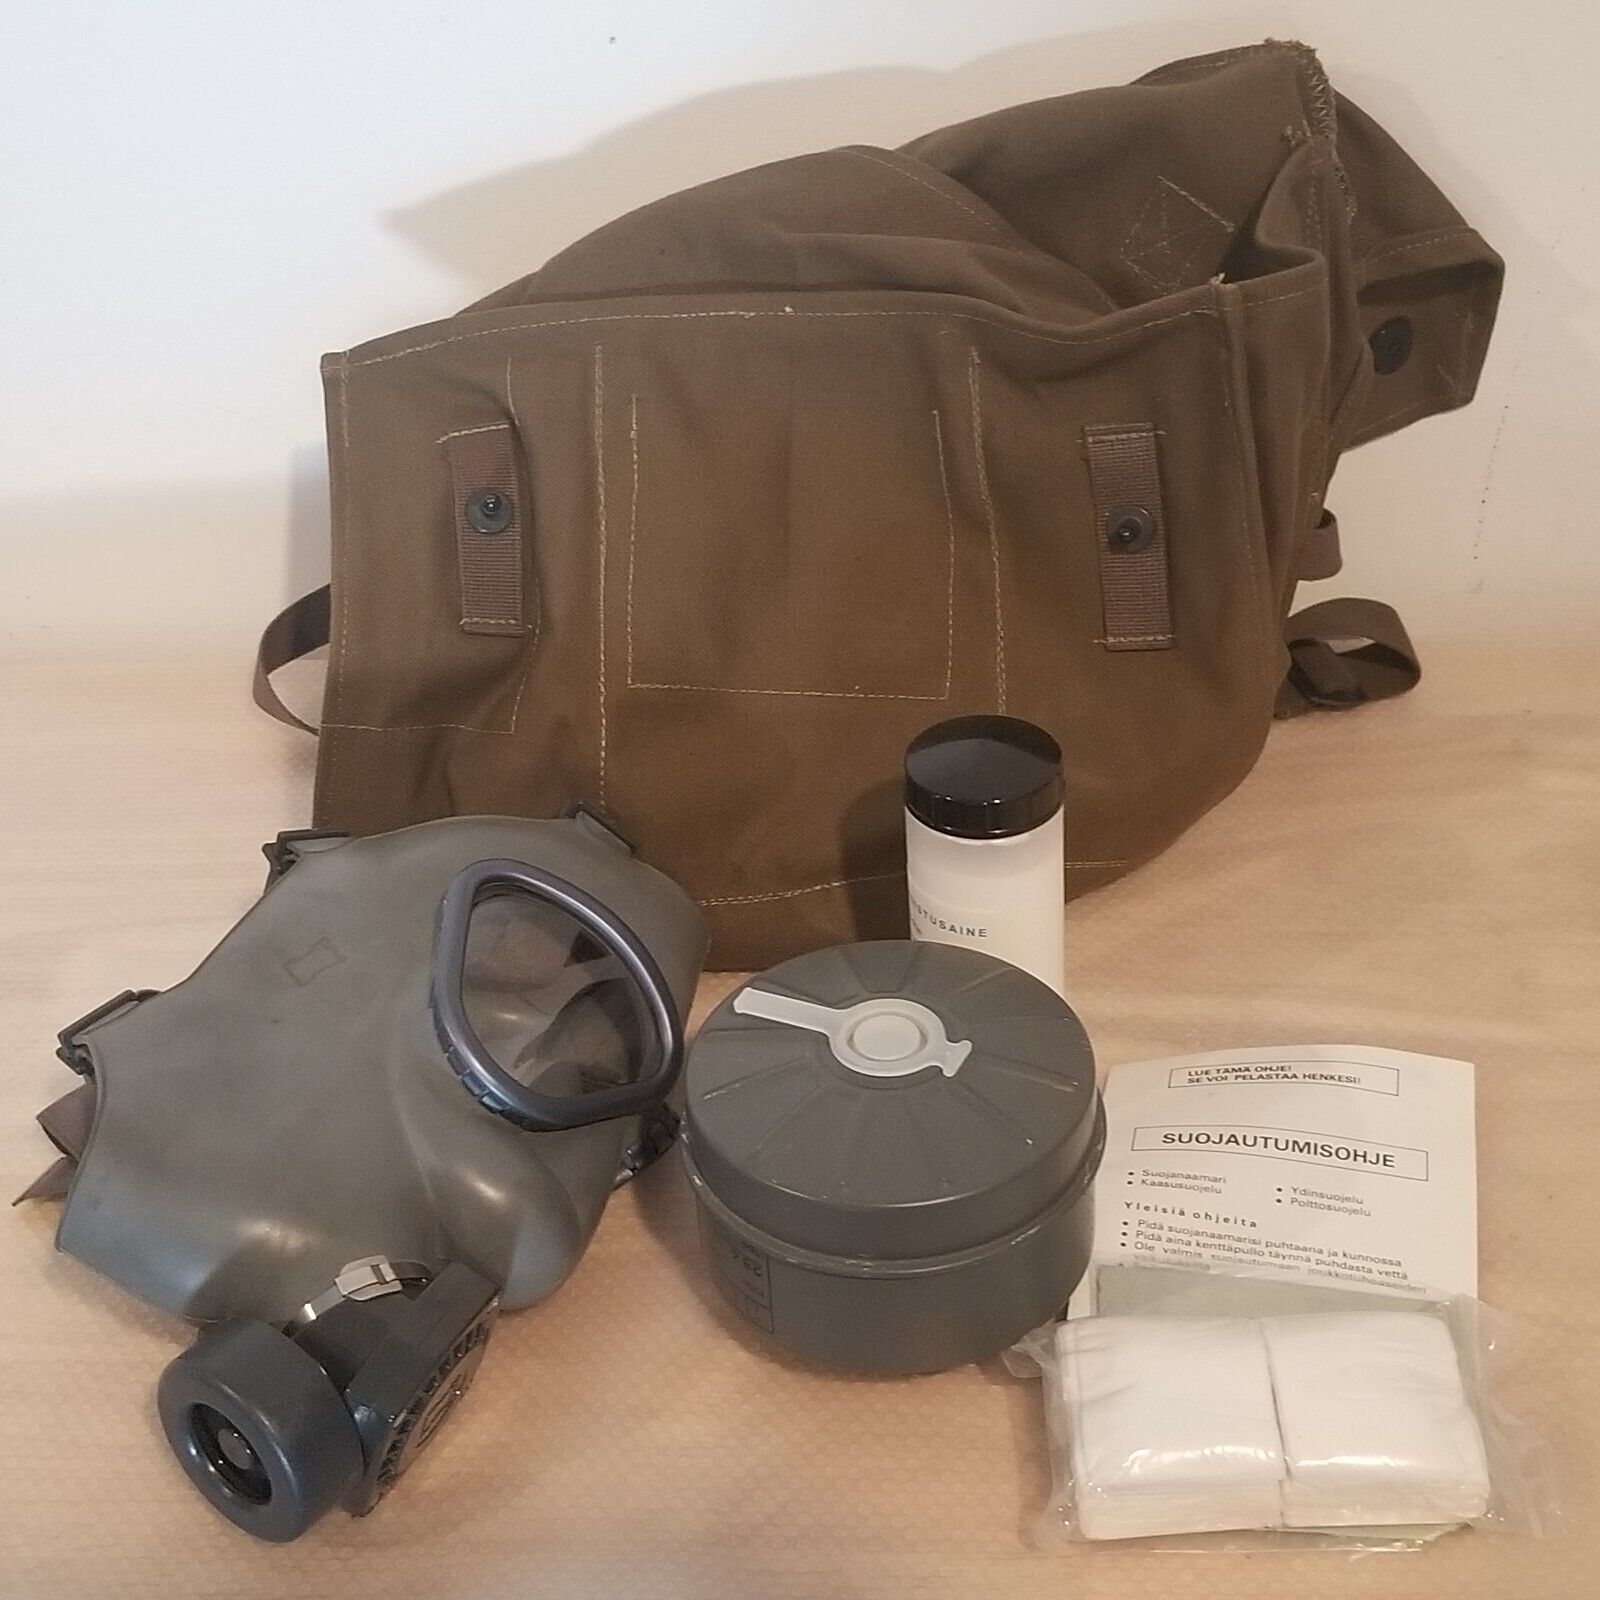 Finnish Army Military Surplus Gas Mask, NOS, Respirator, Bag, Sealed Filter